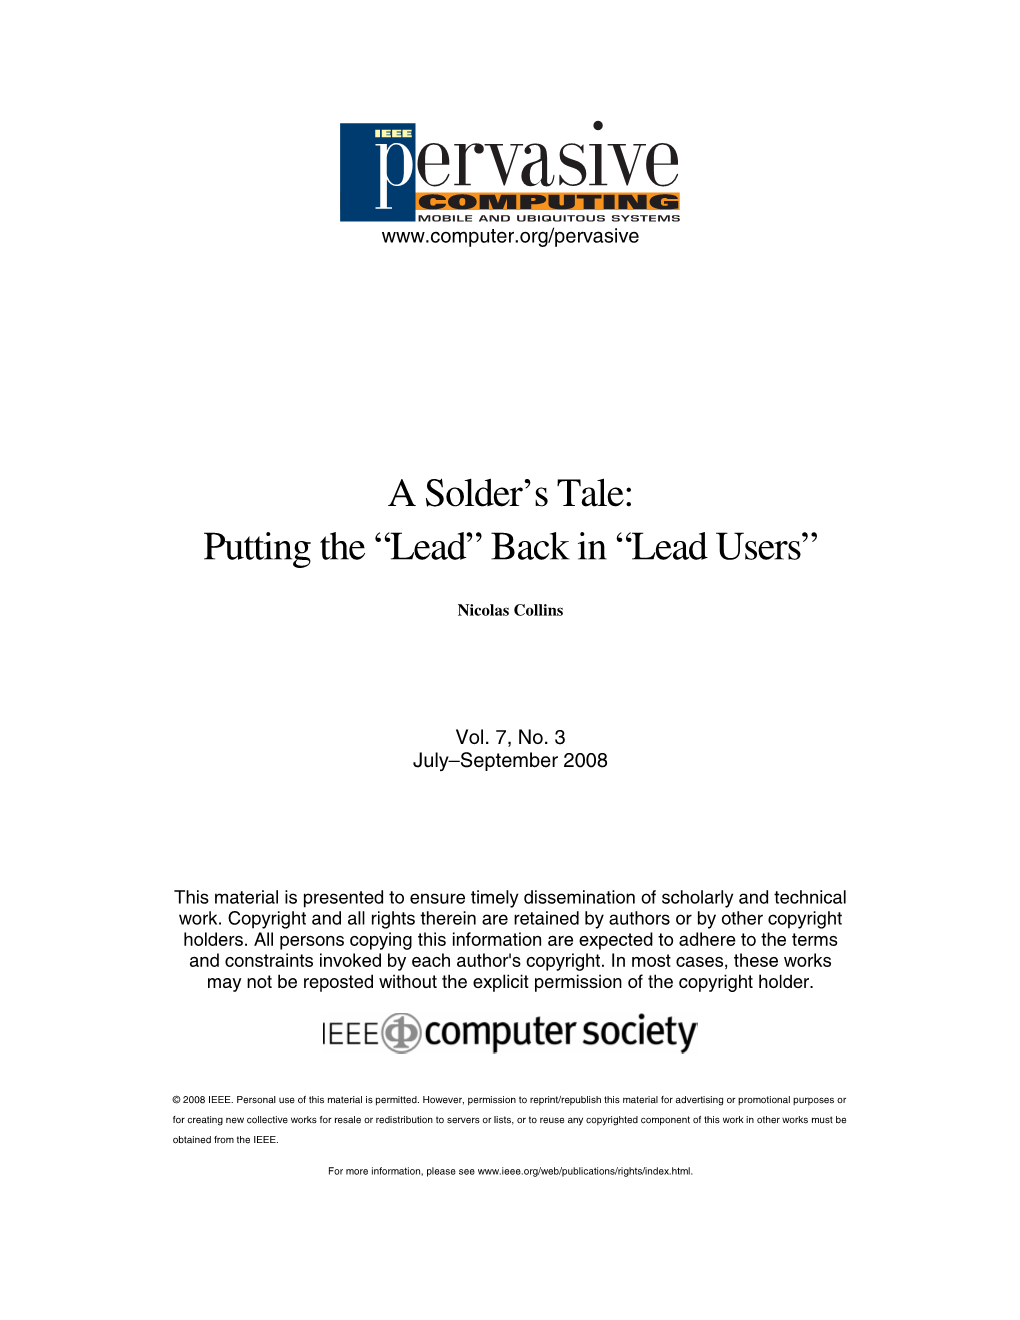 A Solder's Tale: Putting the “Lead” Back in “Lead Users”